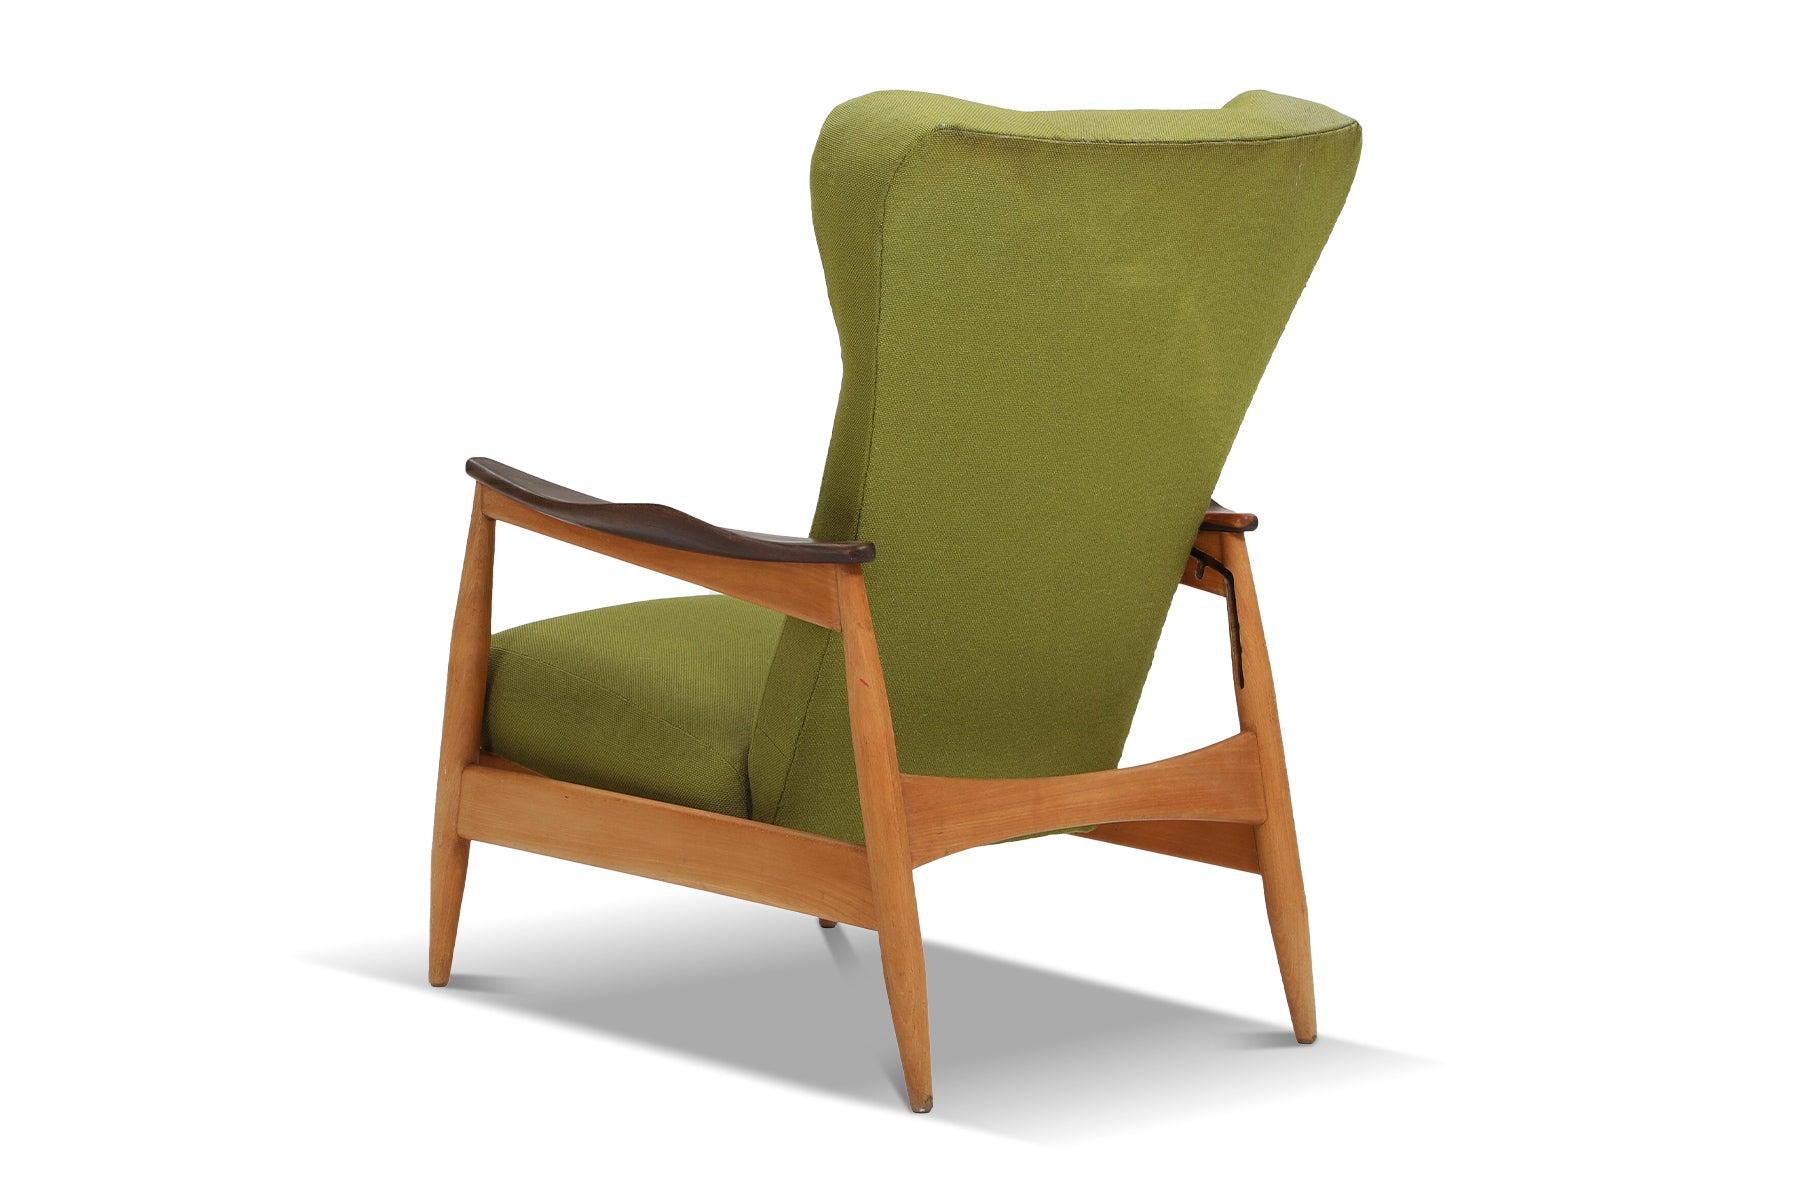 Origin: Denmark
Designer: Unknown
Manufacturer: Unknown
Era: 1950s
Materials: Beech, Wool
Measurements: Inquire for Dimensions

Condition: Frame in great original condition with wear to the original fabric. Price includes upholstery in your